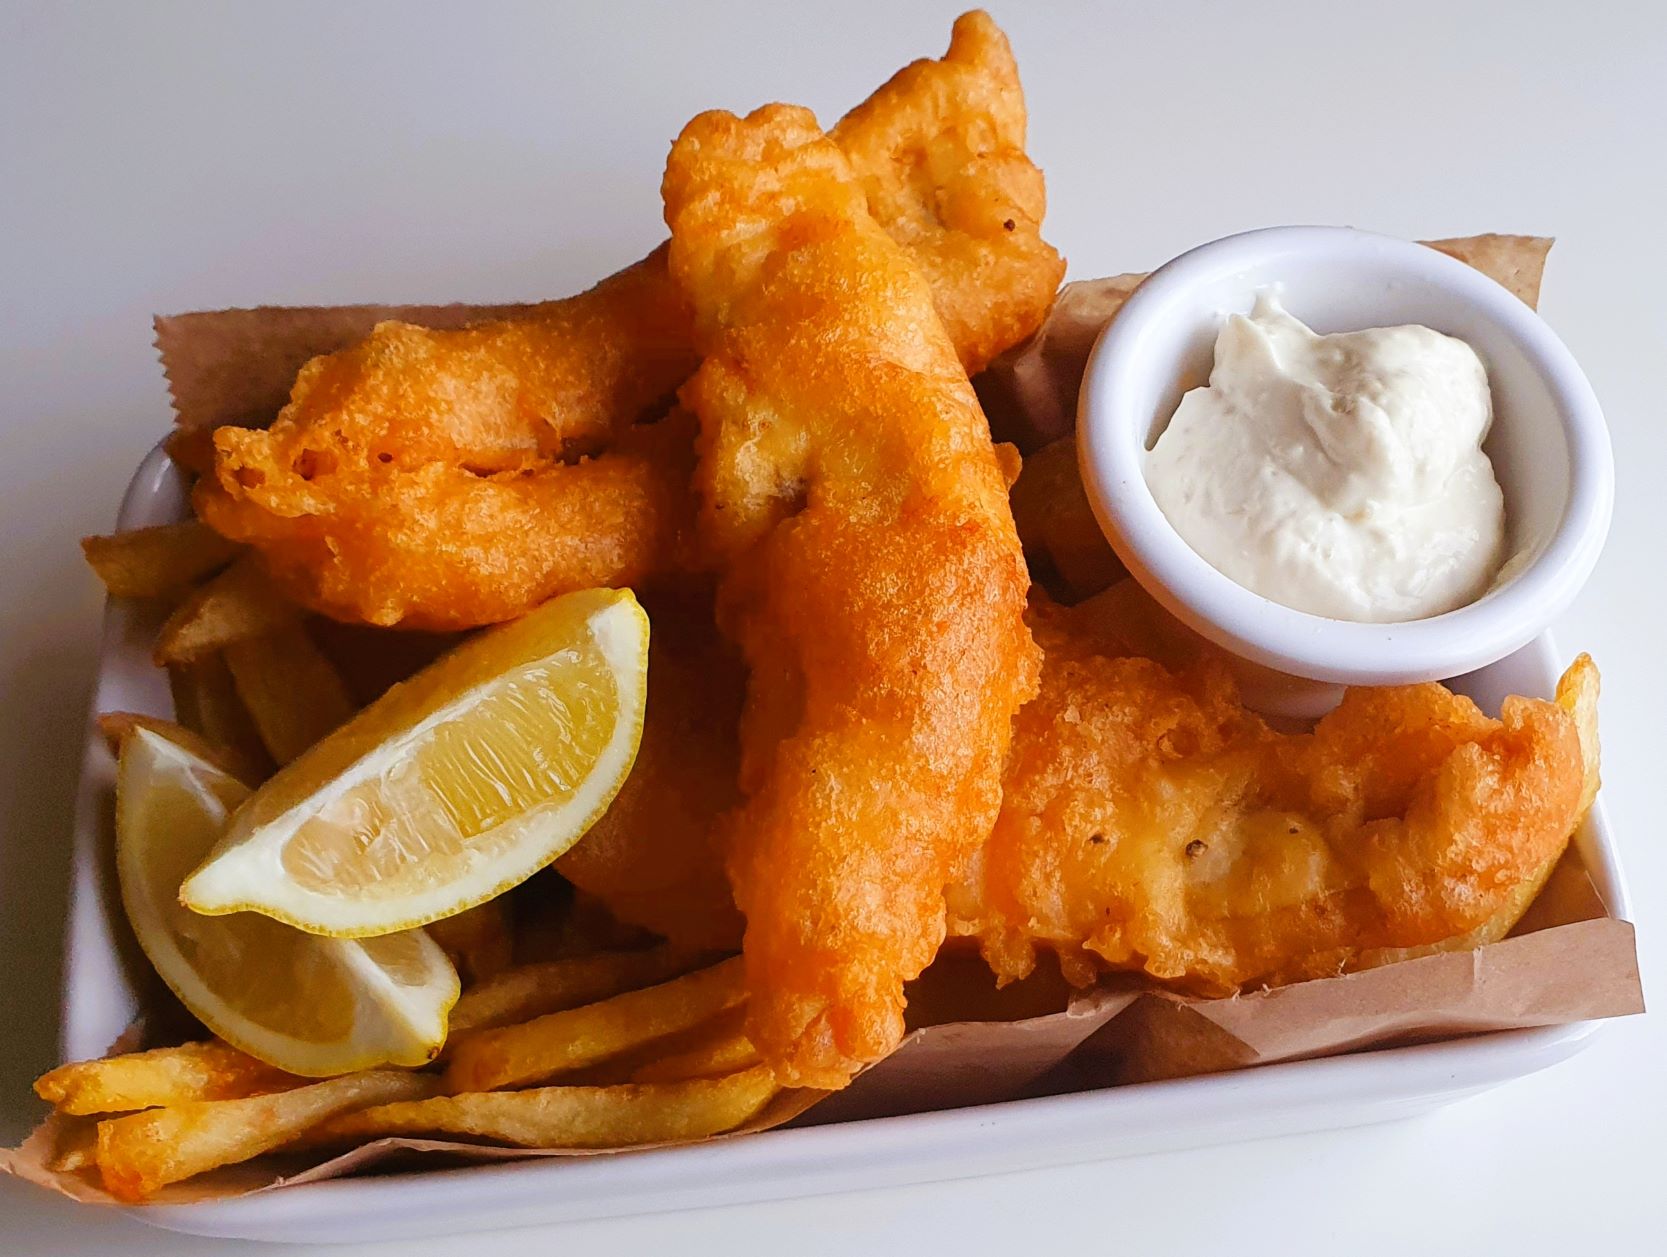 Beer Battered Fish and Chips - Classic Recipe! - Julie's Eats & Treats ®